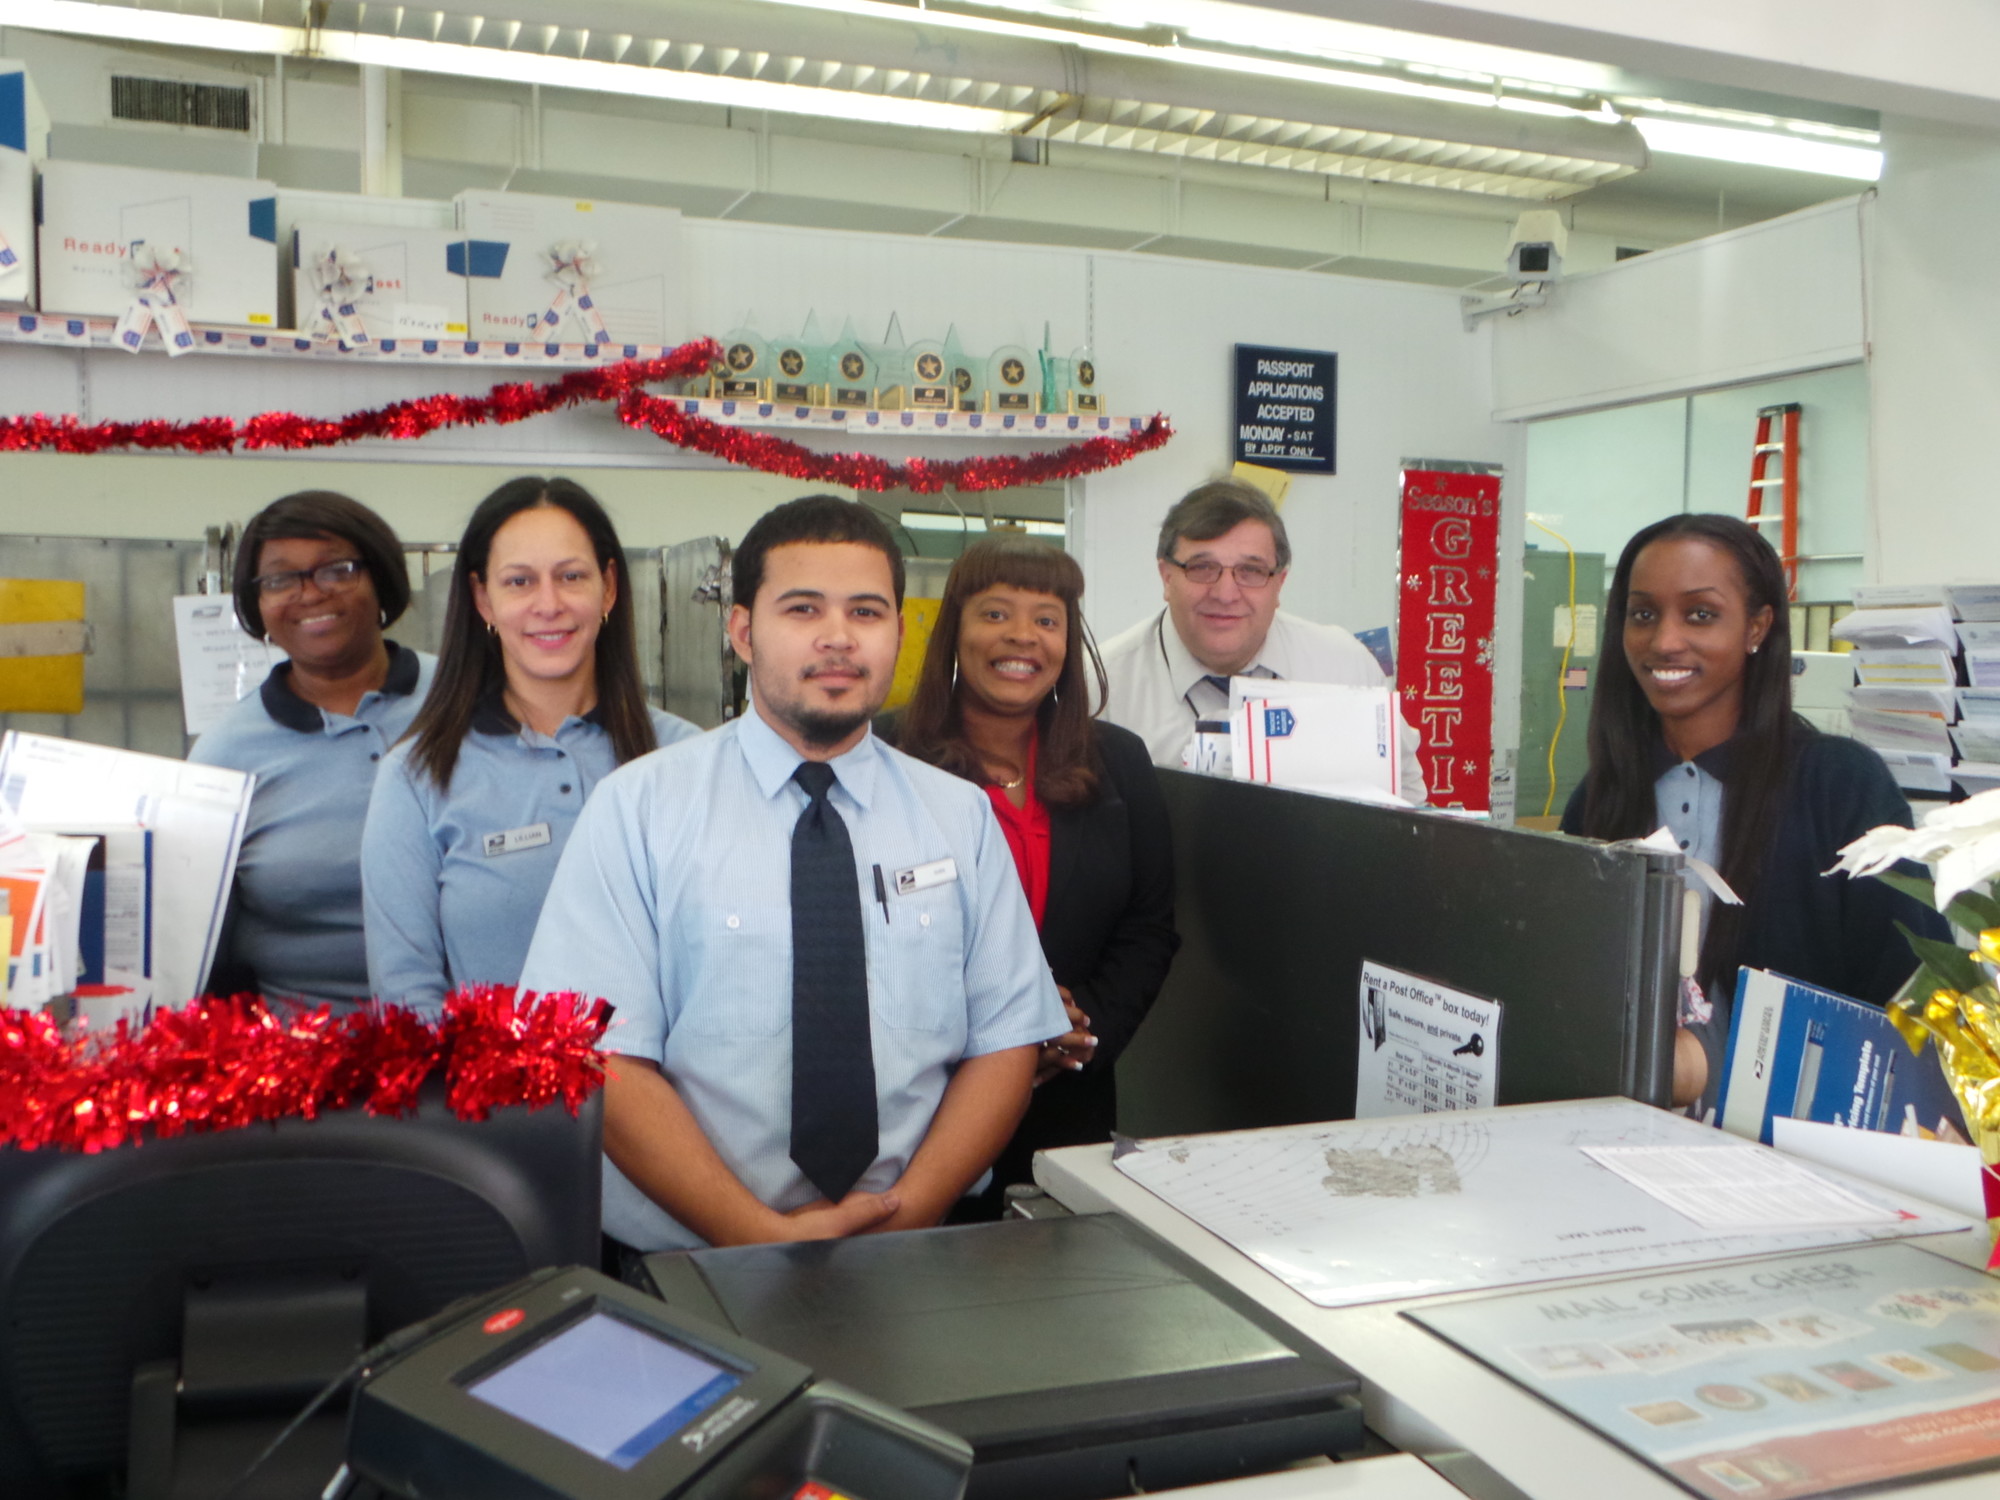 Employees of the West Hempstead Post Office include, from left, Jasmine Rubie, Lillian Torres, Ivan Espinal, Pamela Baker, Vincent Violante and Krisann Forbes.